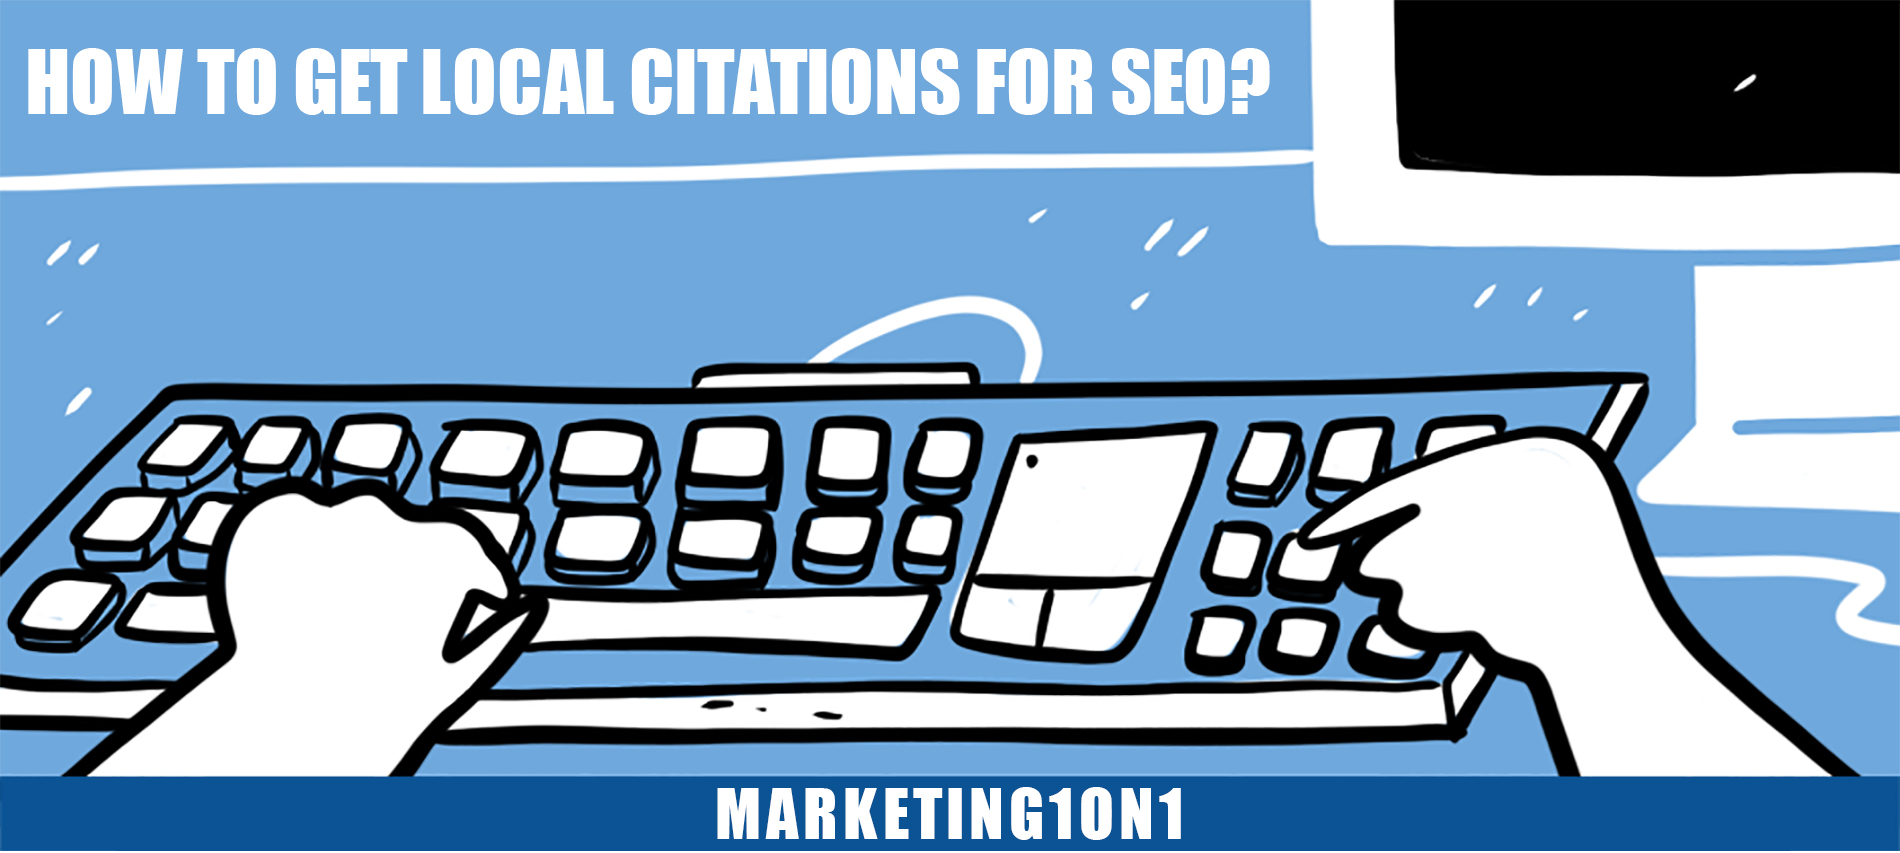 How to get local citations for SEO?